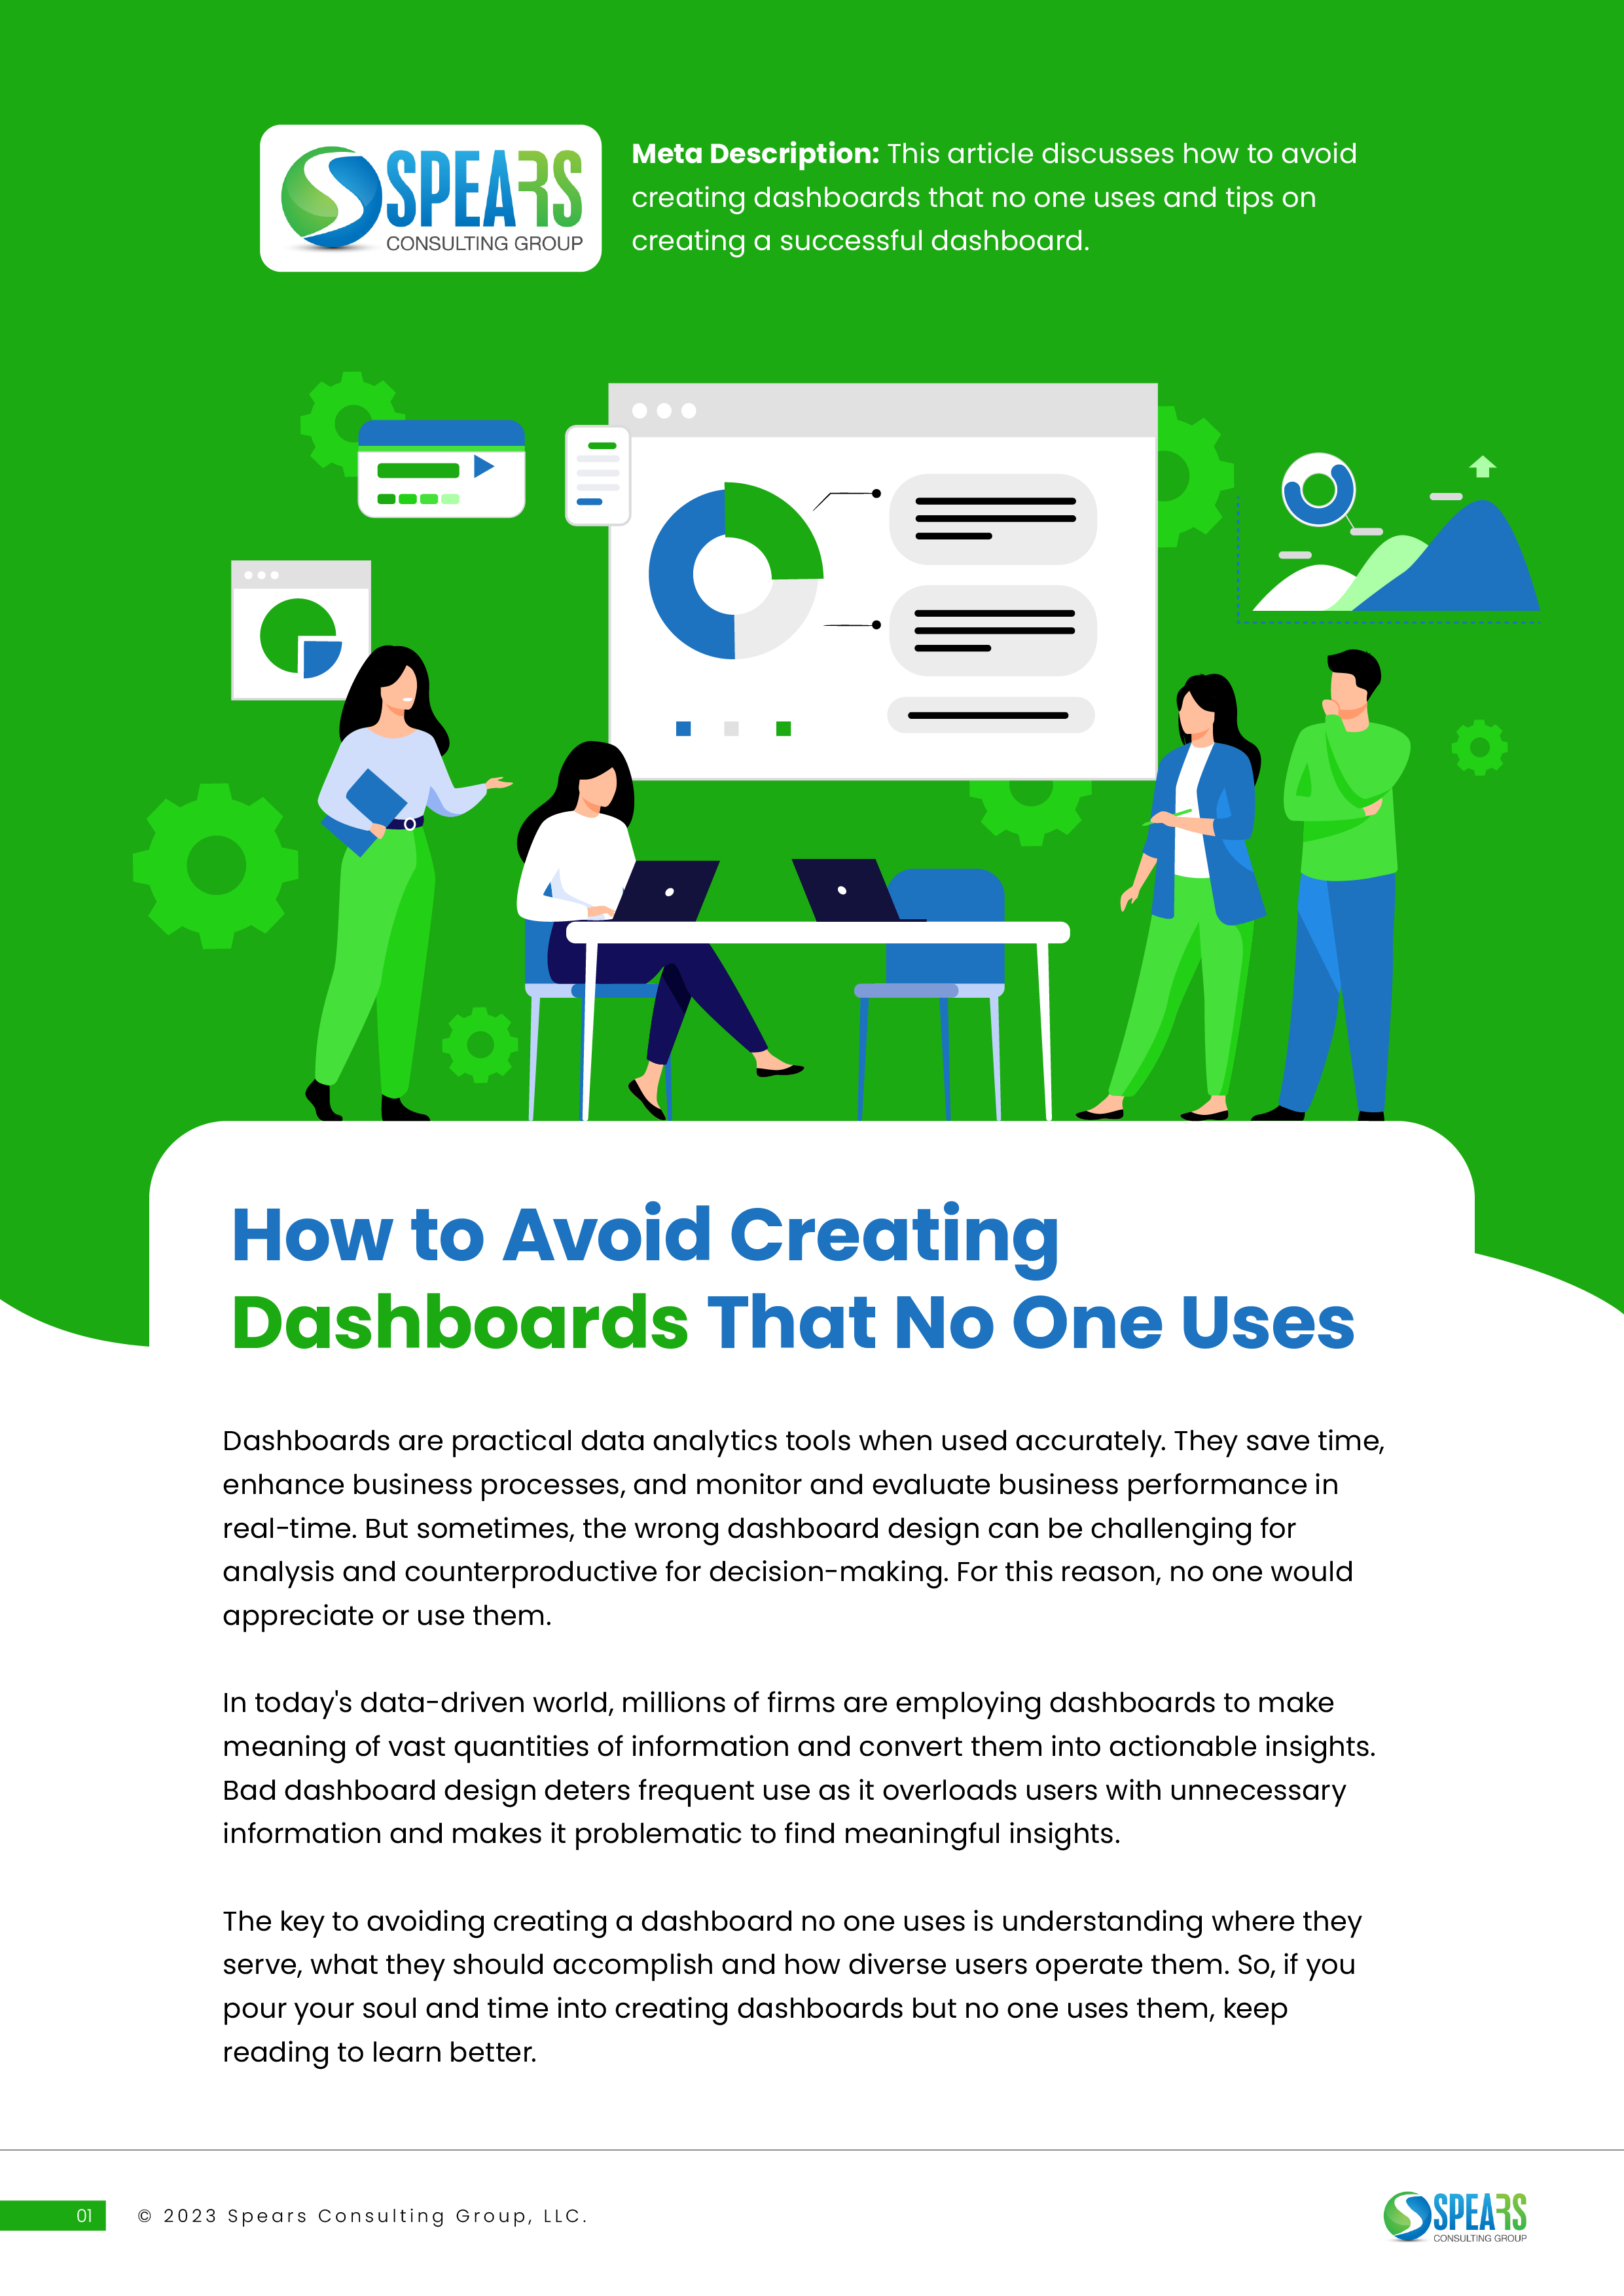 Avoid Creating Dashboards that No One Uses